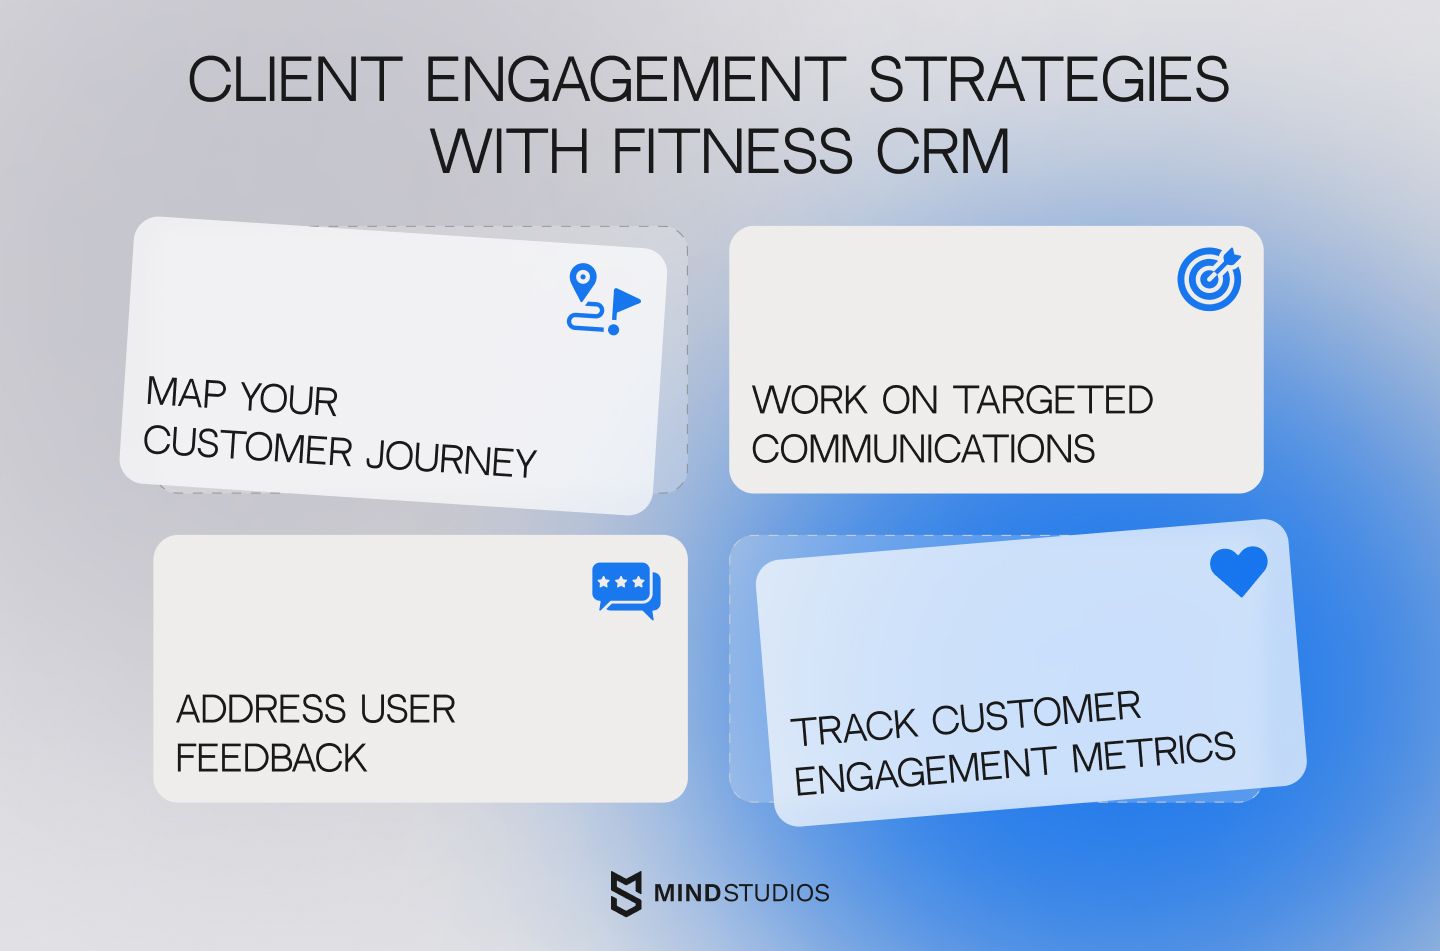 Client engagement strategies with fitness CRM